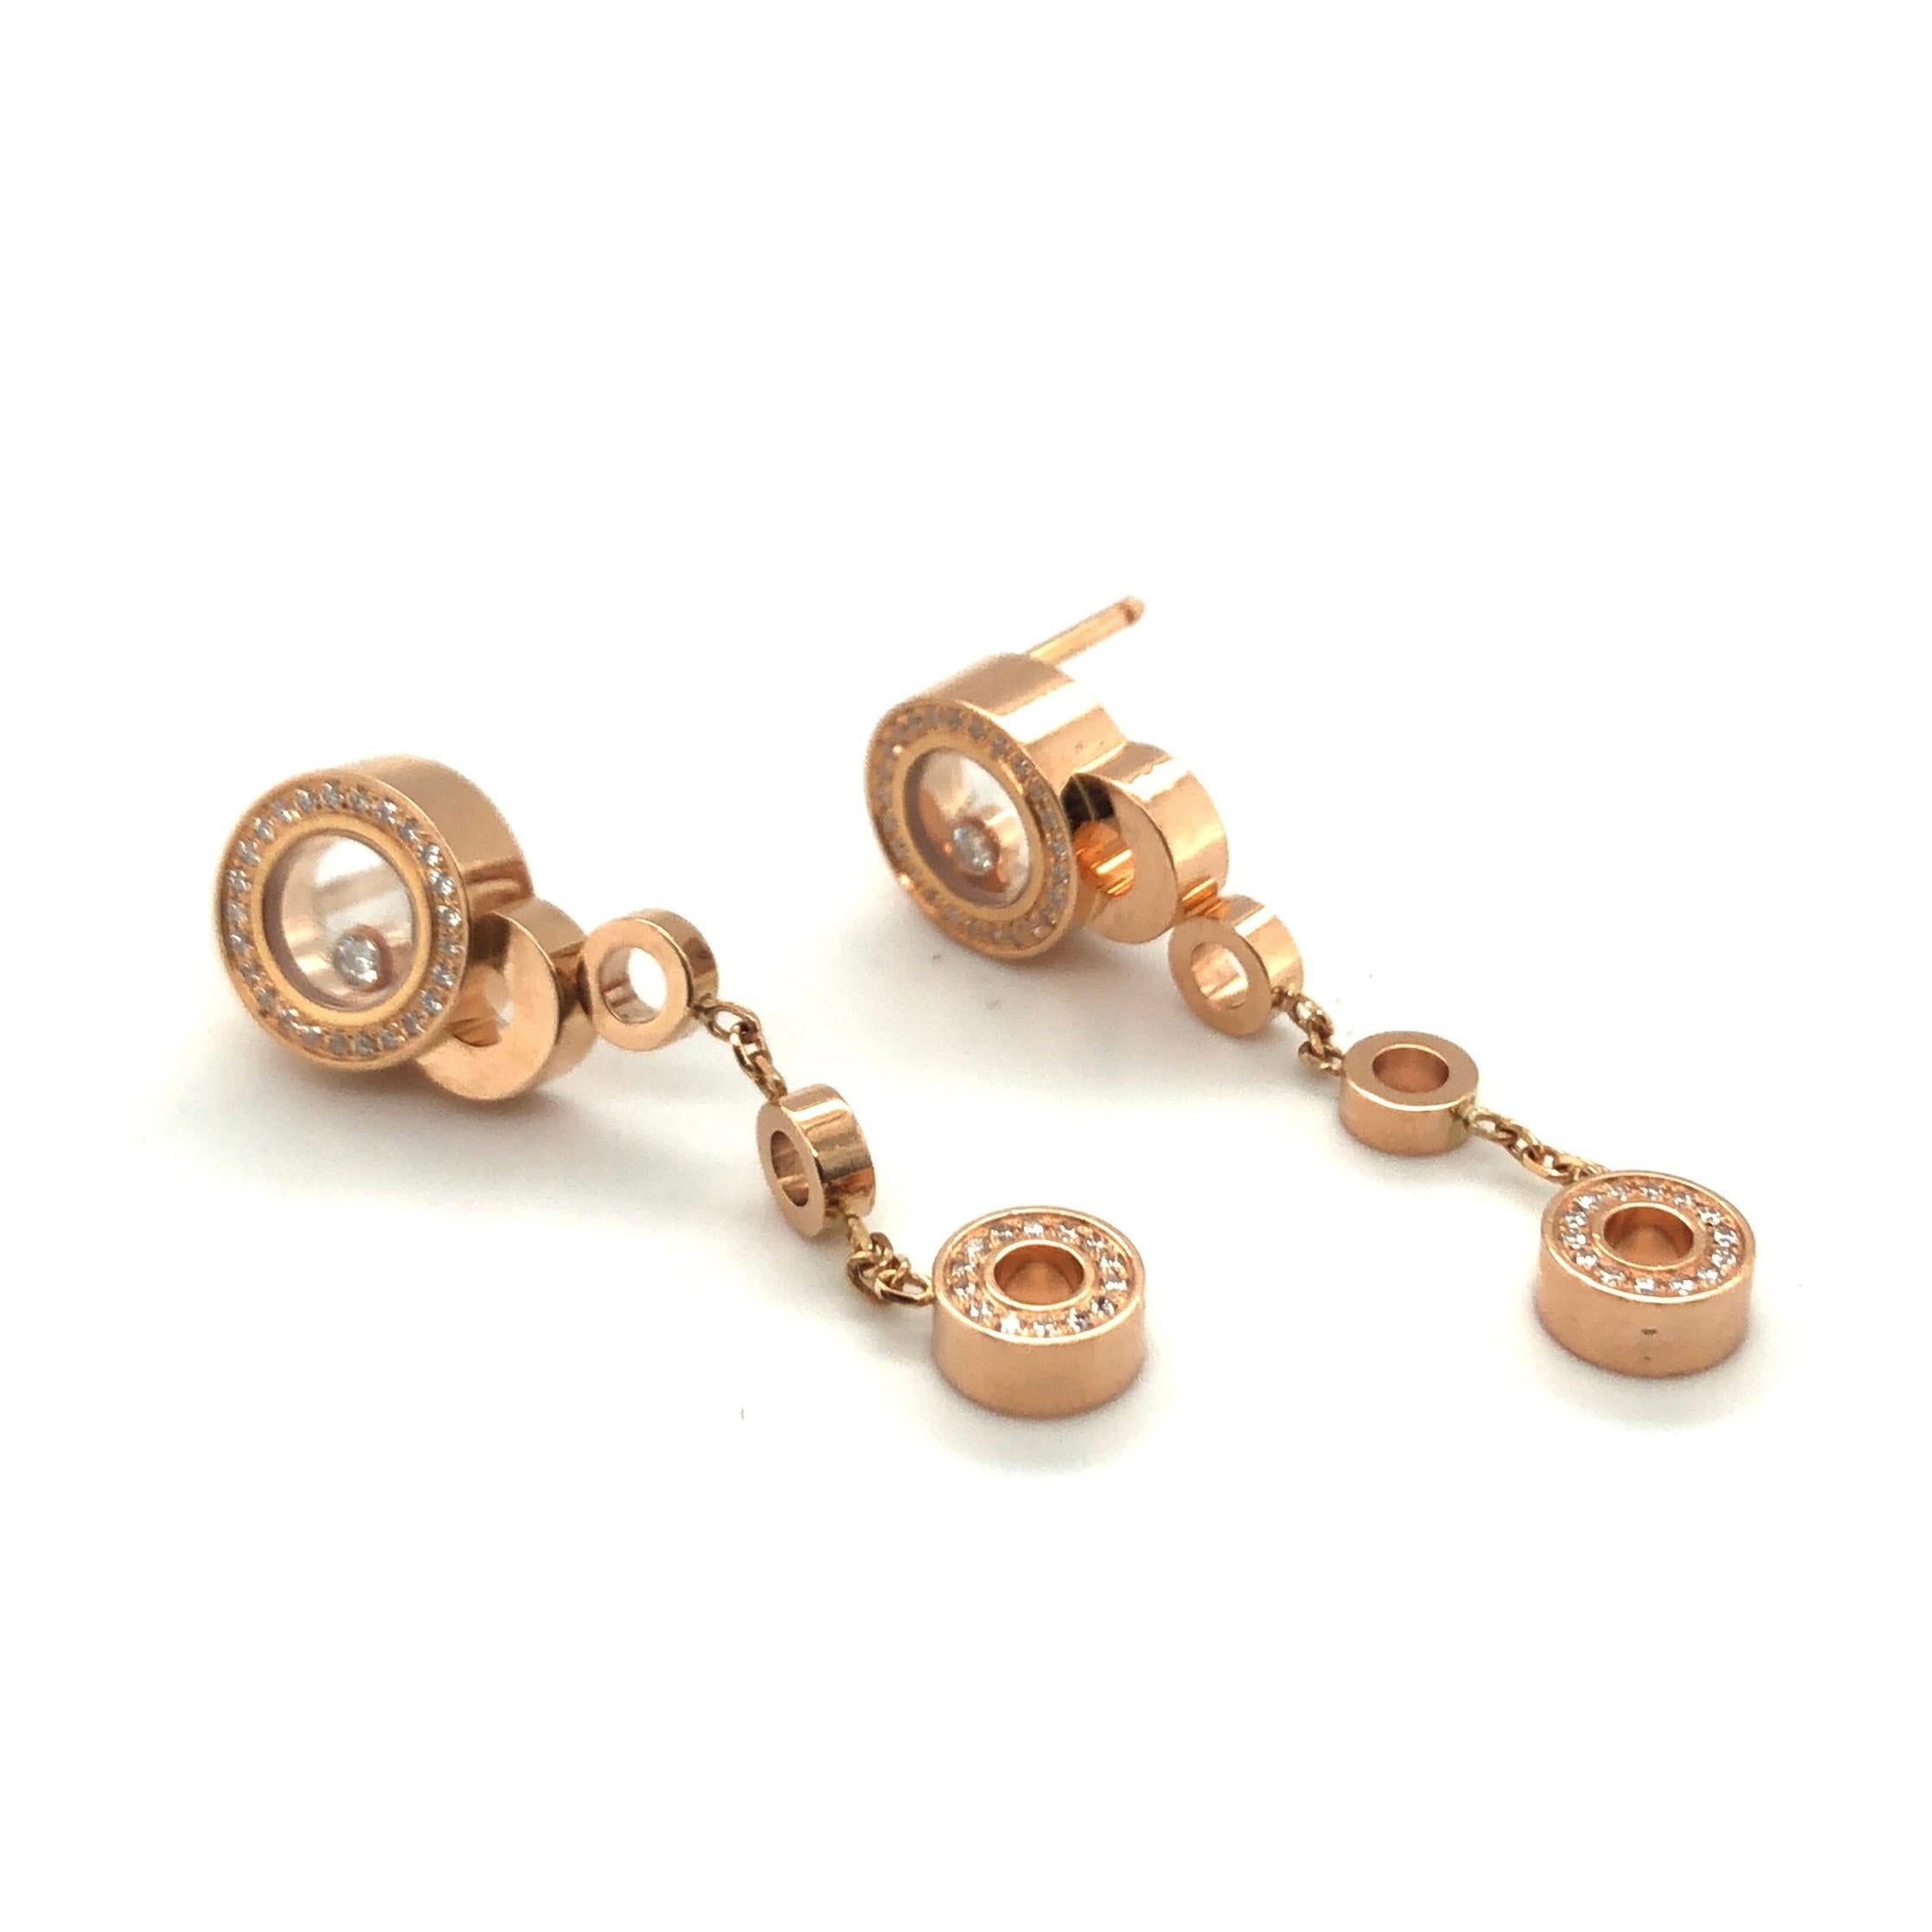 Dazzling pair of Chopard Happy Dreams 18 karat rose gold and diamonds earpendants.
Each featuring five rose gold circles of various sizes which are irregularly superimposed to resemble clouds. The four biggest circles are diamond-set and two of them